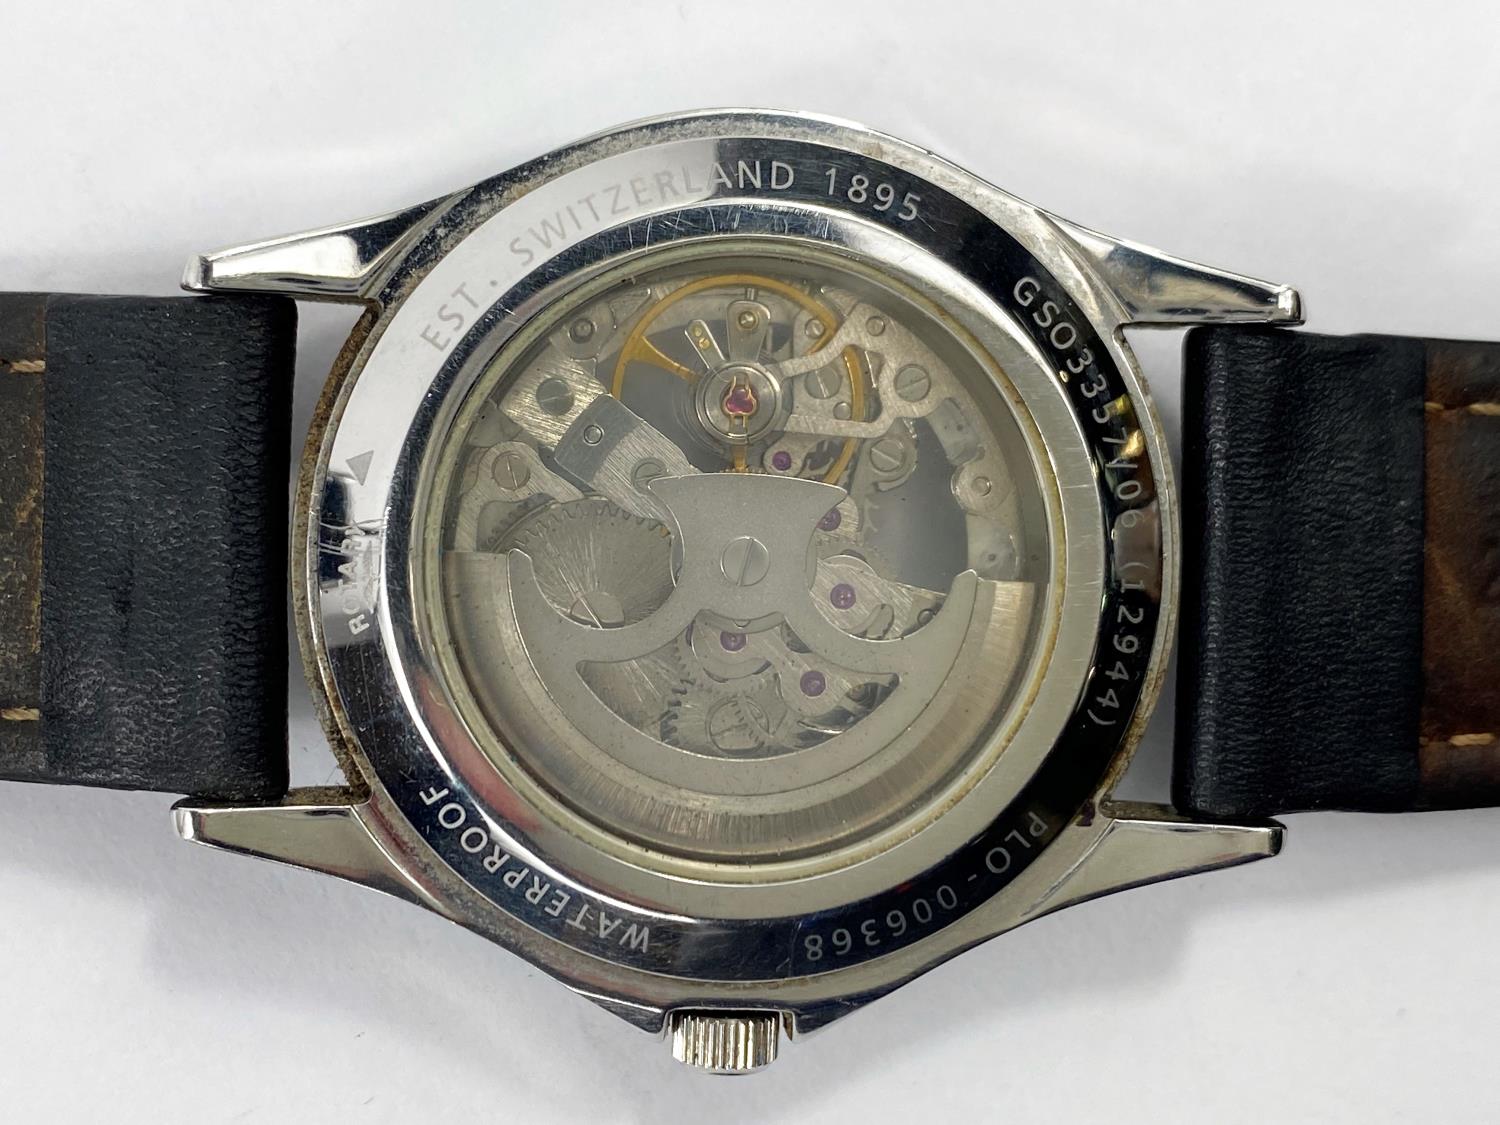 A Rotary Automatic skeleton face open back gent's wrist watch on black leather strap - Image 3 of 4